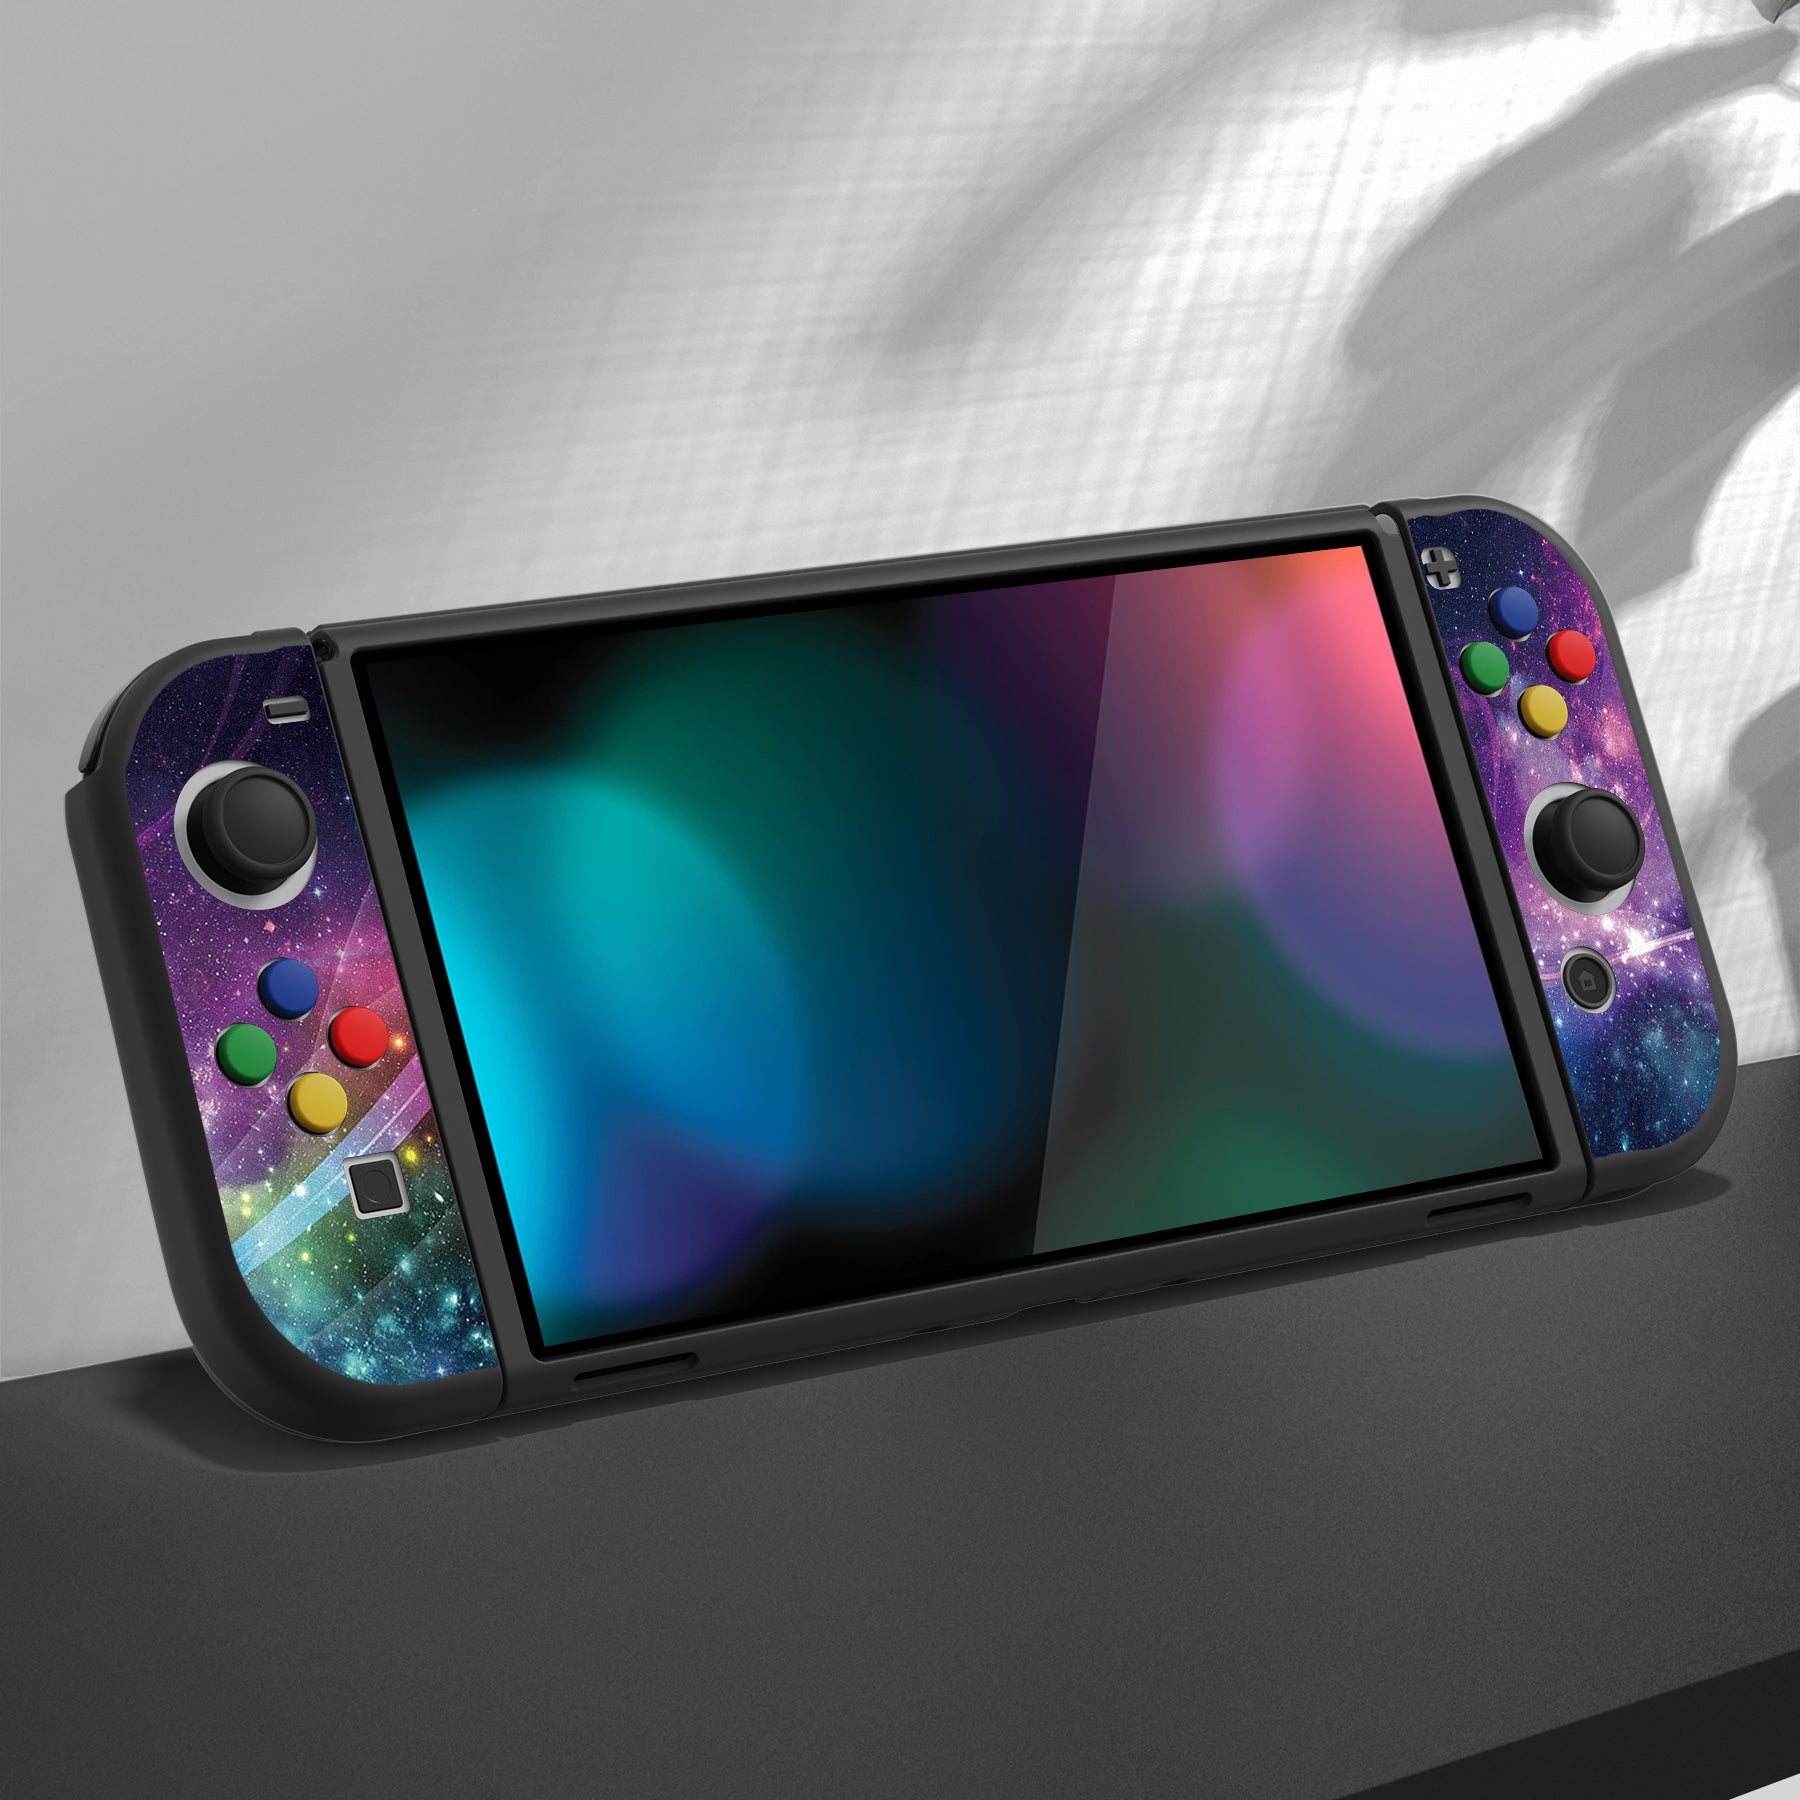 PlayVital ZealProtect Soft Protective Case for Switch OLED, Flexible Protector Joycon Grip Cover for Switch OLED with Thumb Grip Caps & ABXY Direction Button Caps - Purple Galaxy - XSOYV6001 playvital